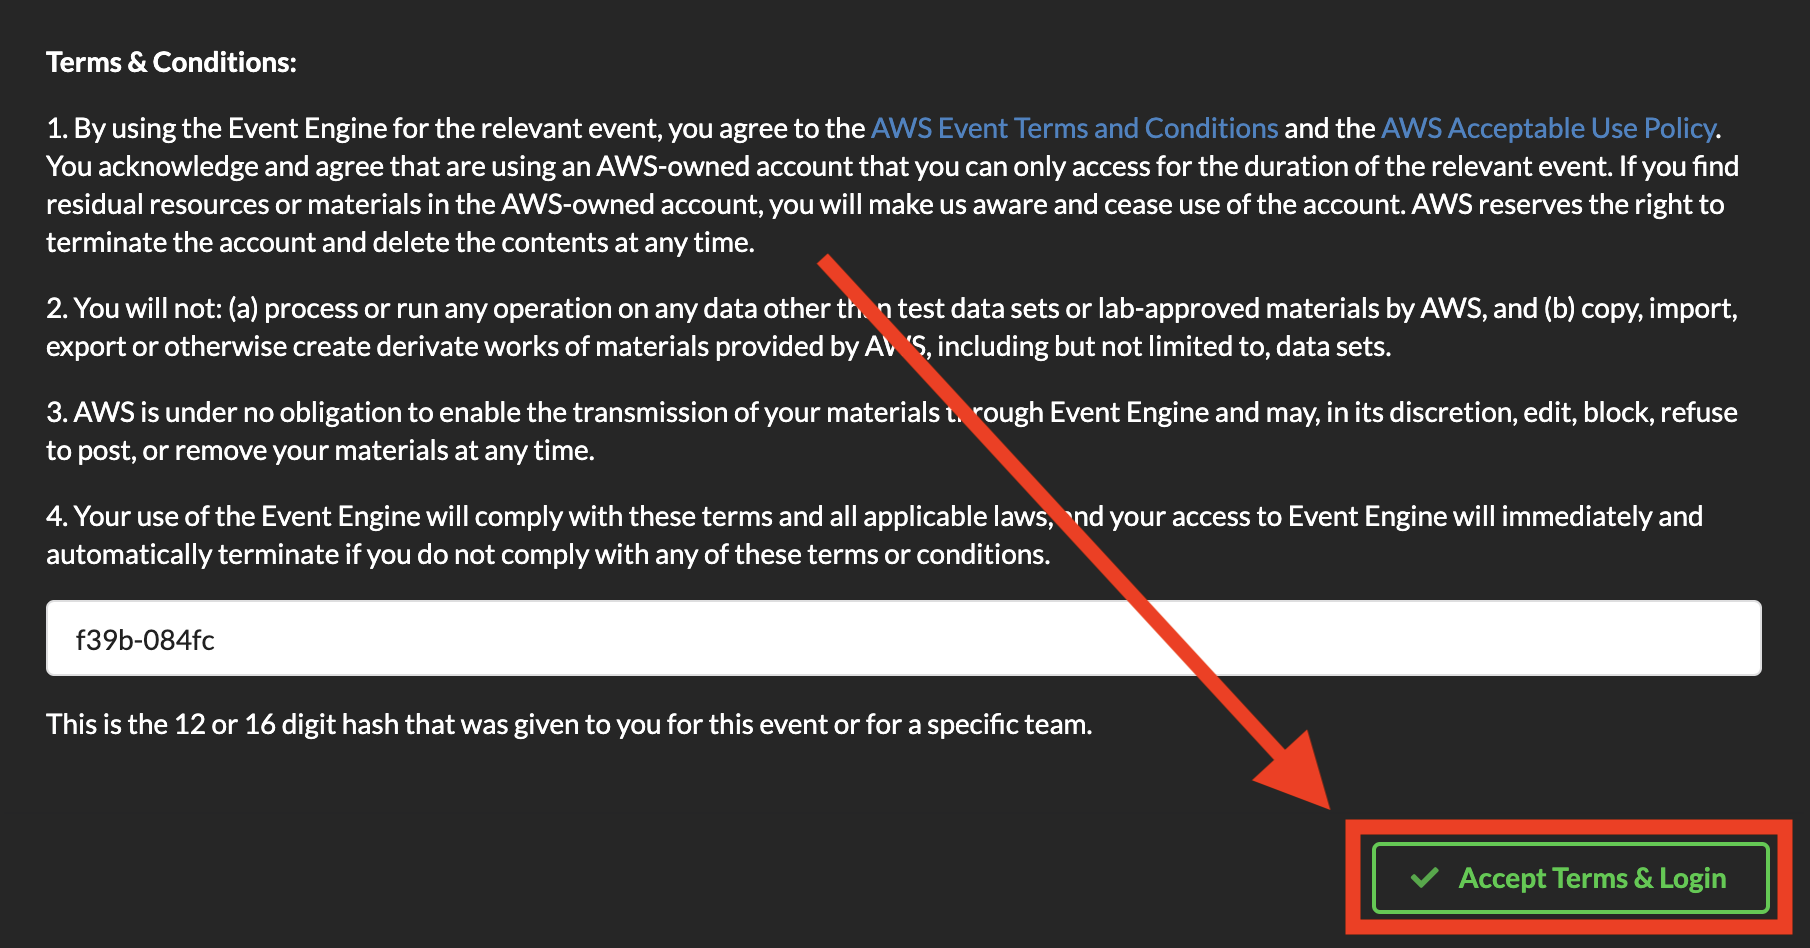 Event Engine Terms and Conditions